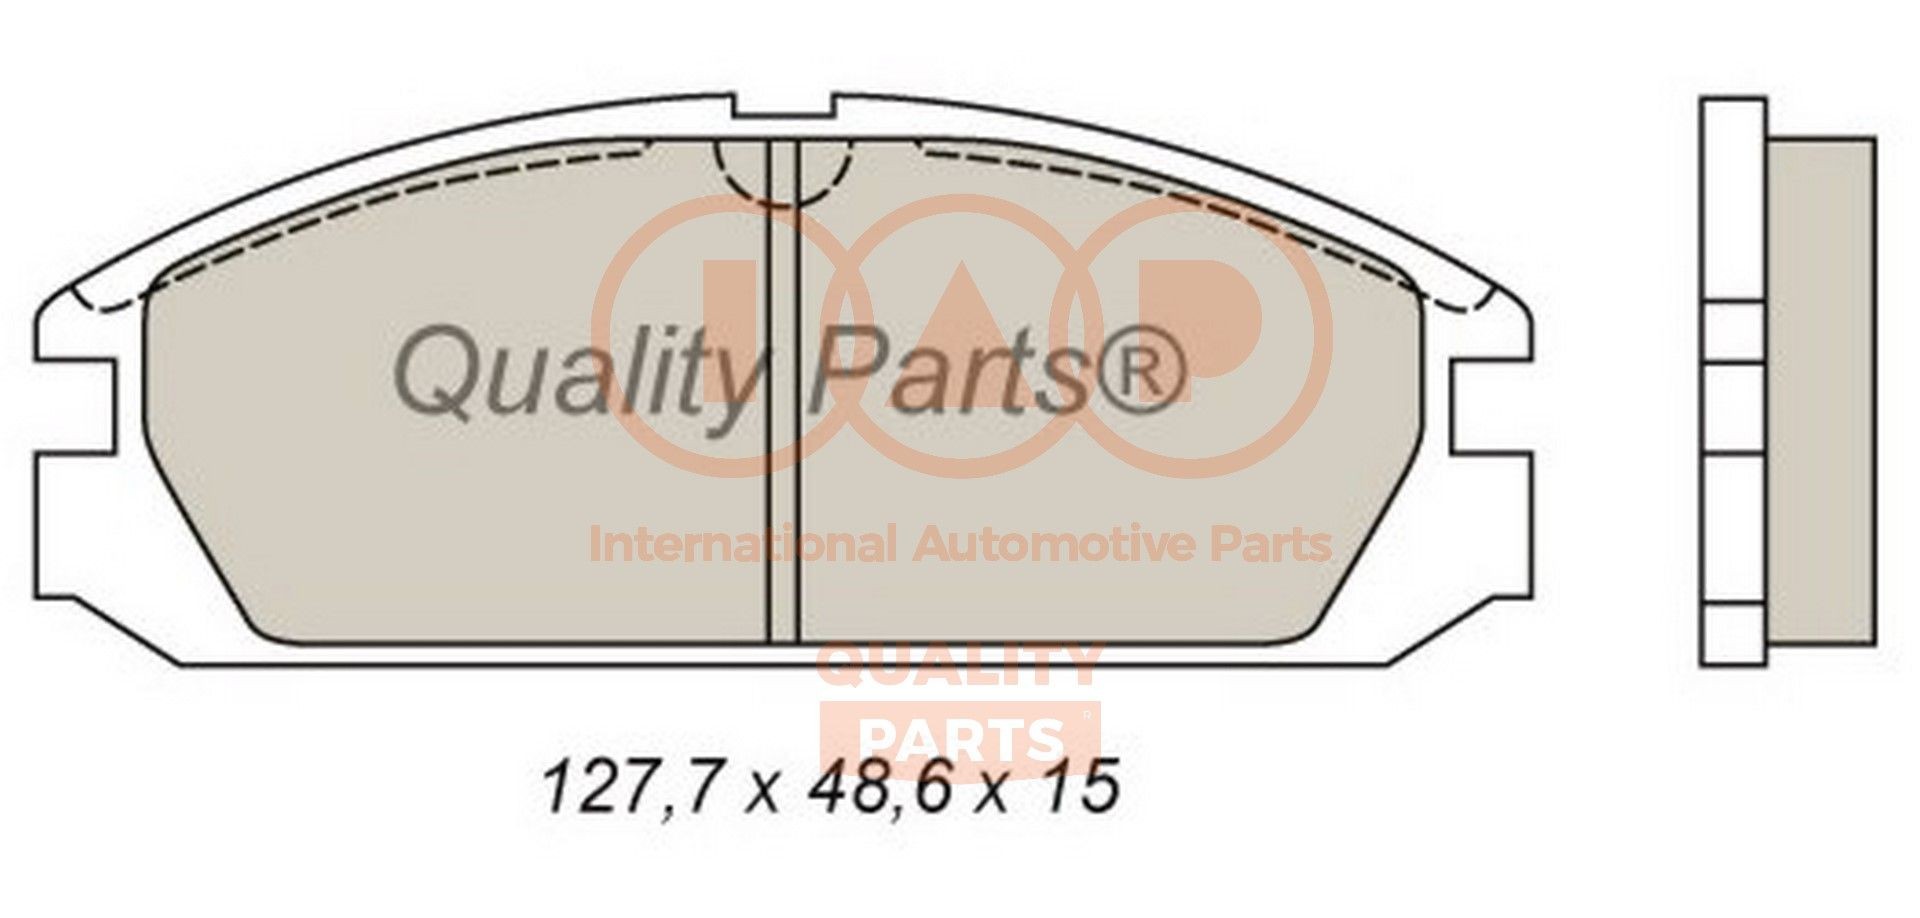 IAP QUALITY PARTS Front Axle Height 1: 48,6mm, Width 1: 127,7mm, Thickness 1: 15mm Brake pads 704-06050 buy